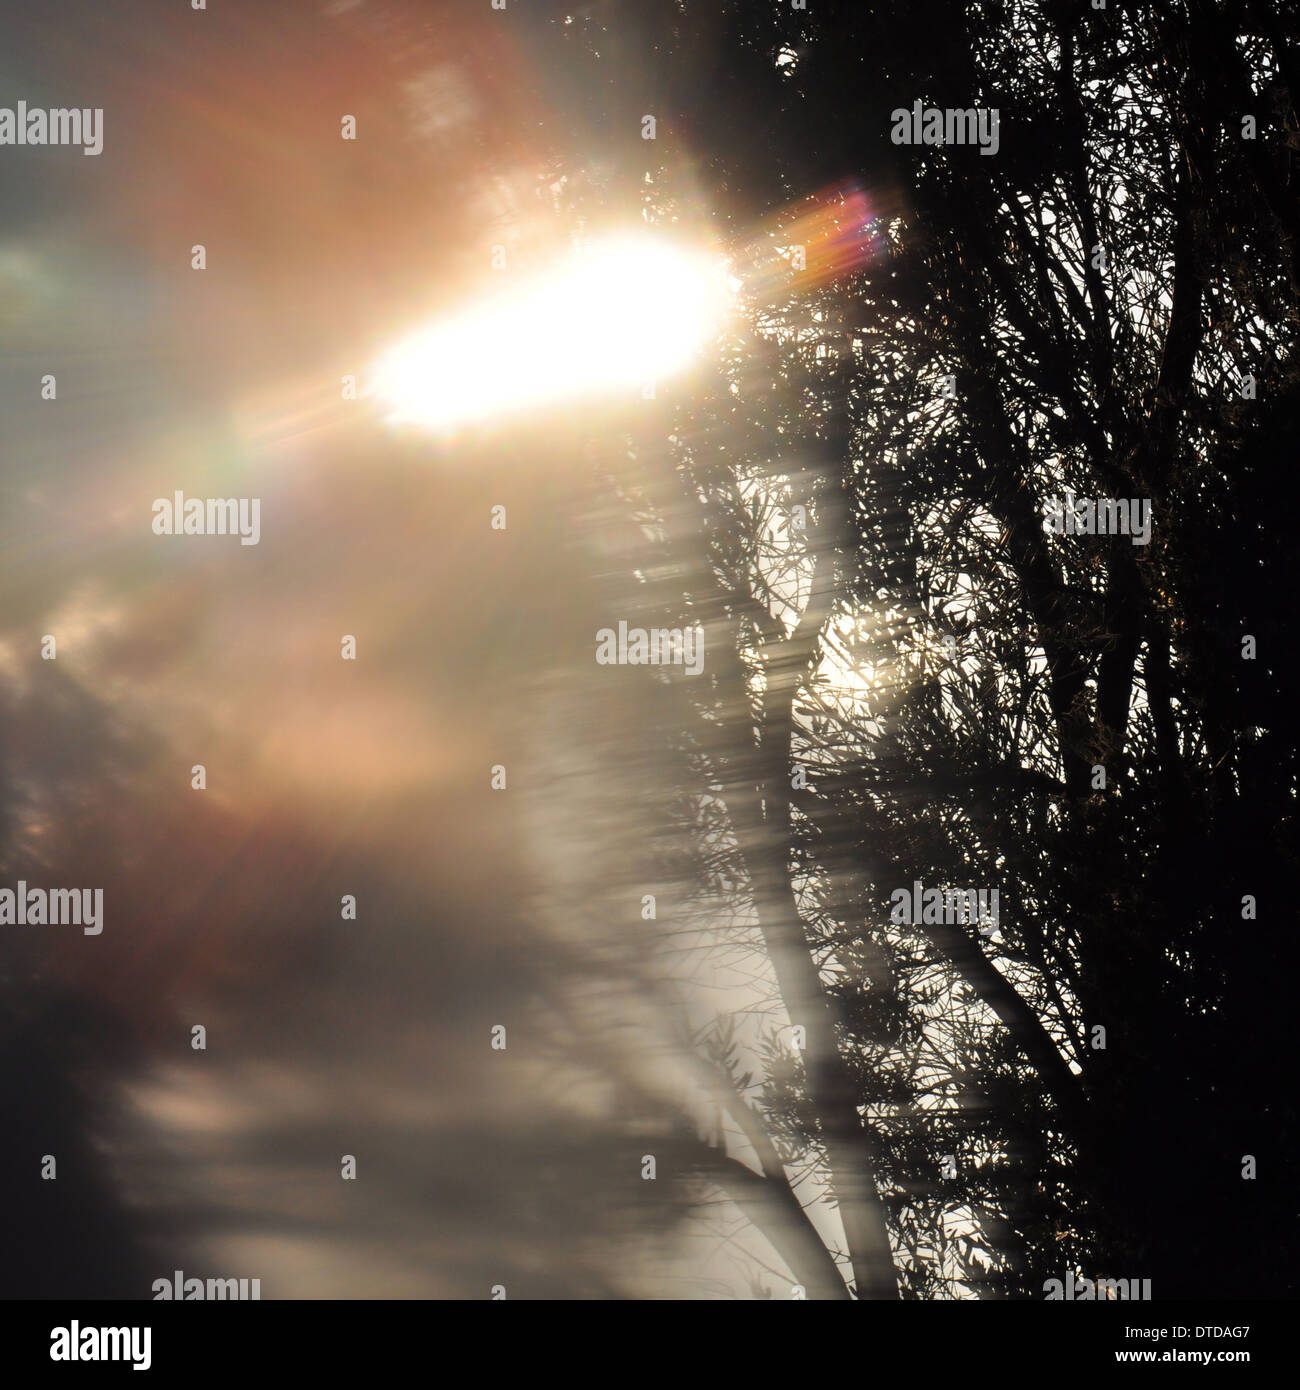 Lens flare and tree branches abstract light leak. Landscape blur partial distortion through painted glass. Stock Photo